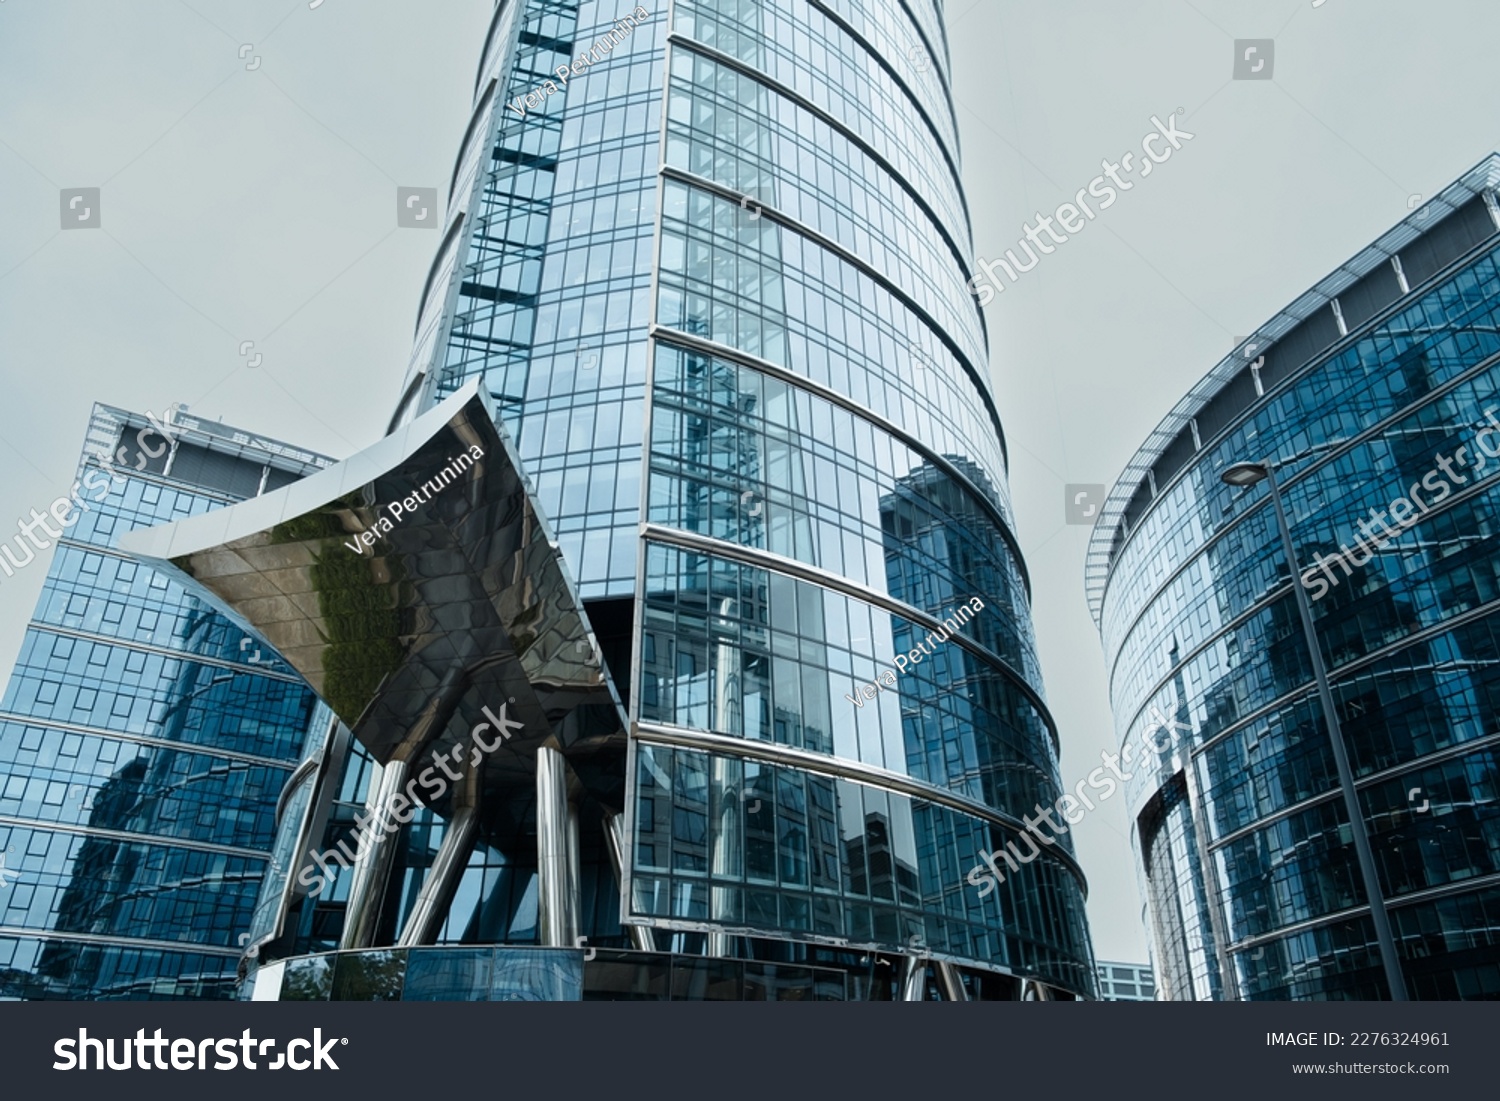 The Warsaw Spire, one of the most famous sights in Poland - May 27, 2022. Warsaw, Poland. #2276324961